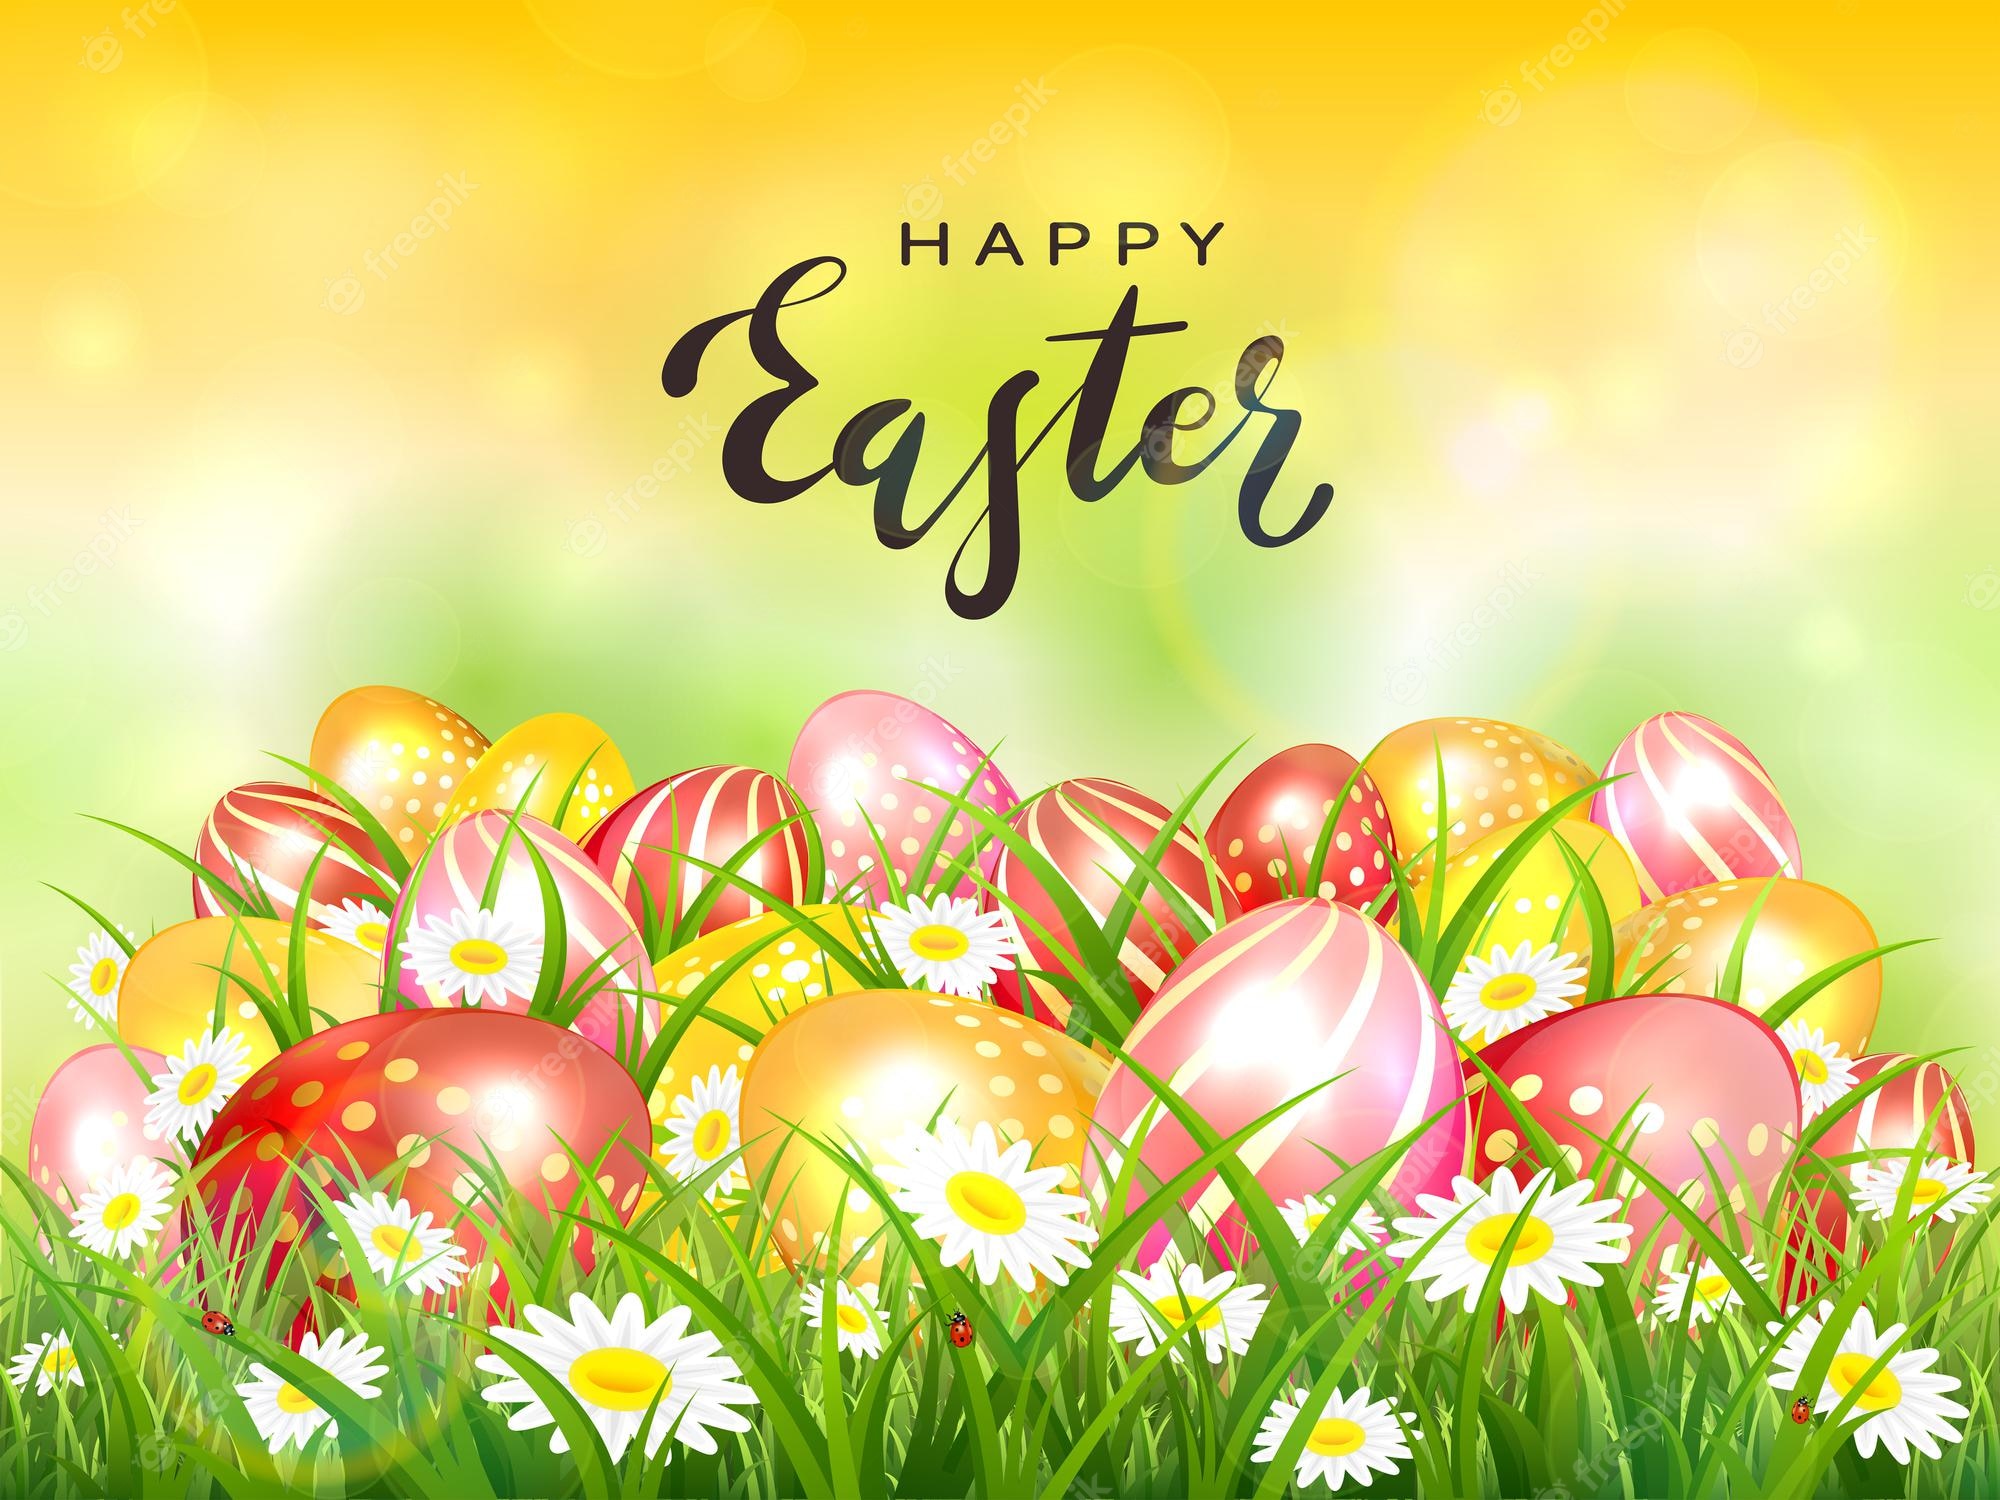 Premium Vector. Easter theme with red, pink and orange eggs in the grass with flowers. black lettering happy easter on yellow background. spring nature. illustration can be used for holiday design